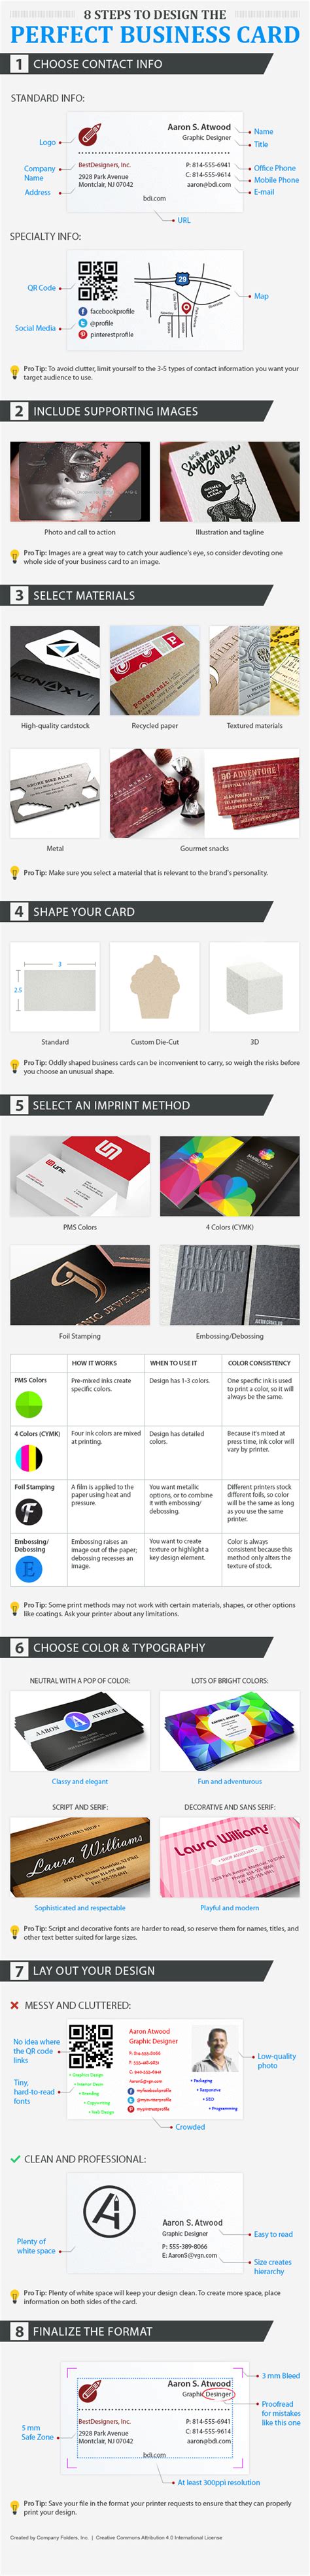 Business Card Design Tips: Top Ideas for Designers